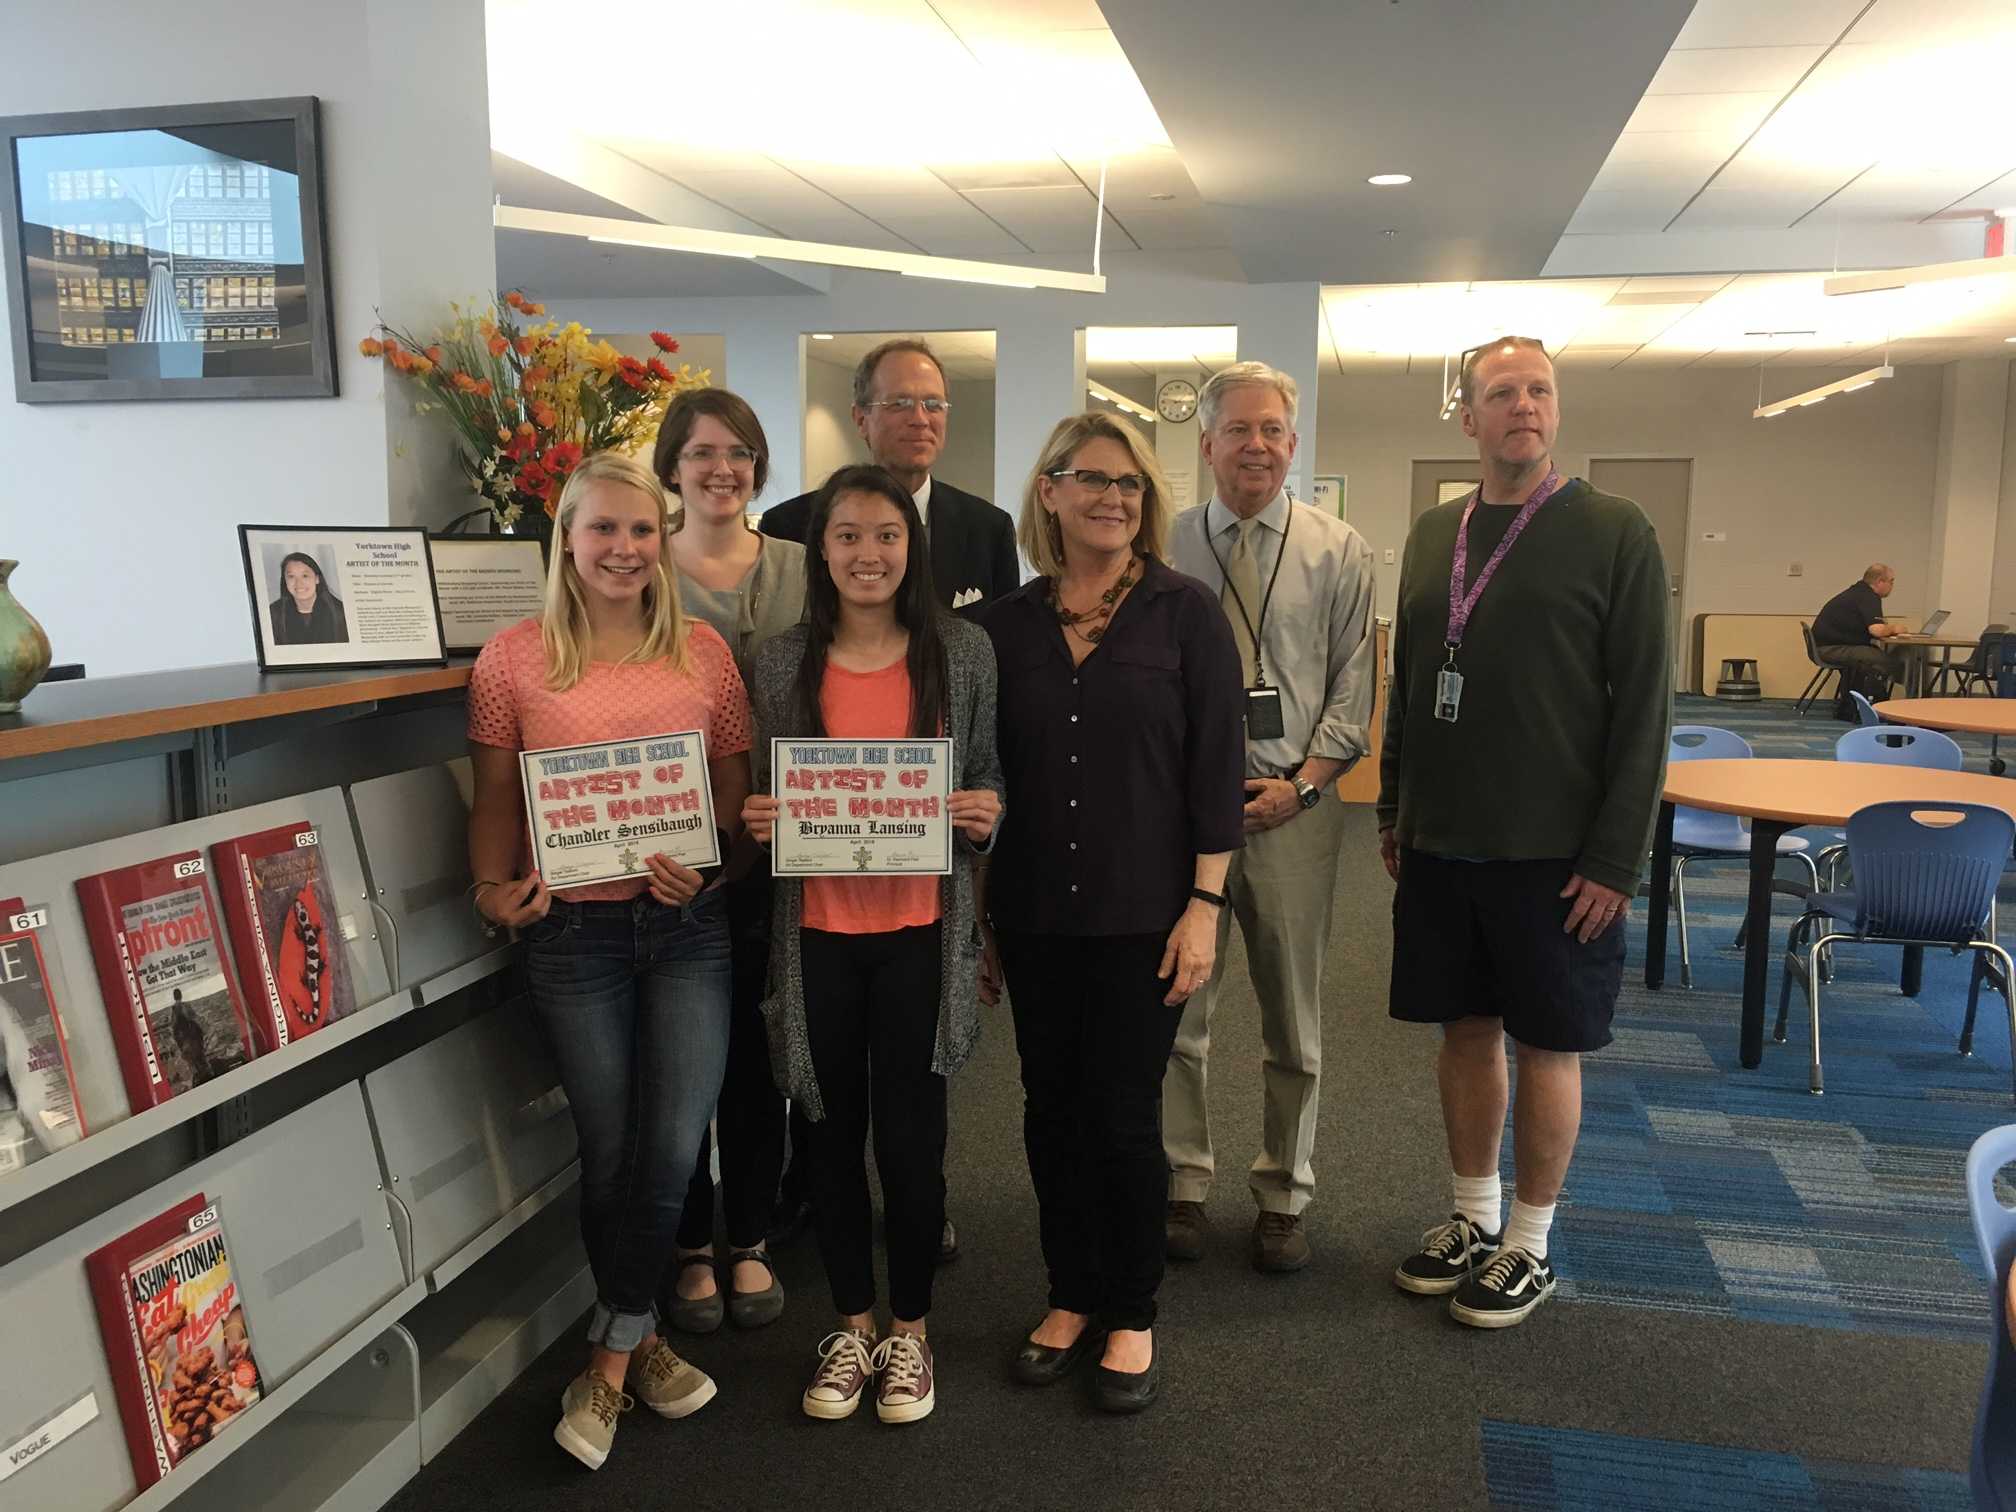 Juniors Chandler Sensibaugh (left) and Bryanna Lansing (front center left) accepting the award of Artist of the Month